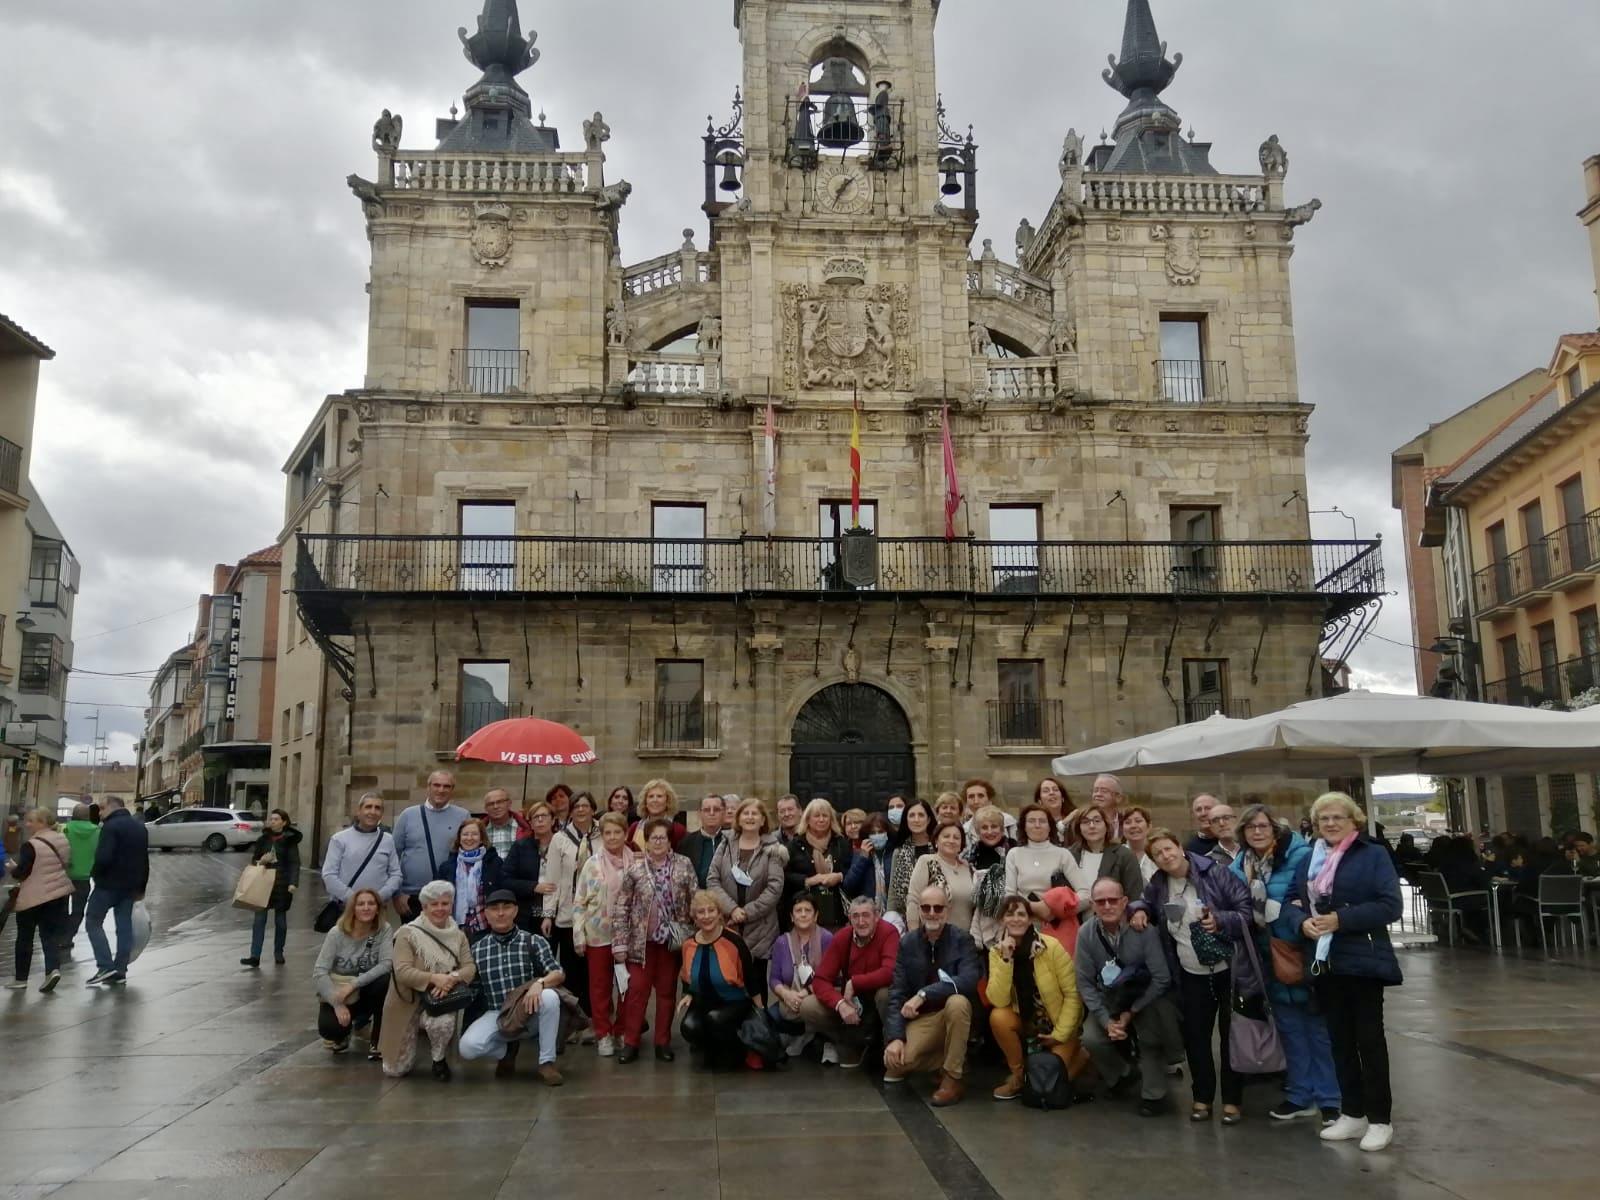 Discover in this private visit, just for your group of friends, family or partner, the most monumental Astorga accompanied by an official expert tour guide in the city.